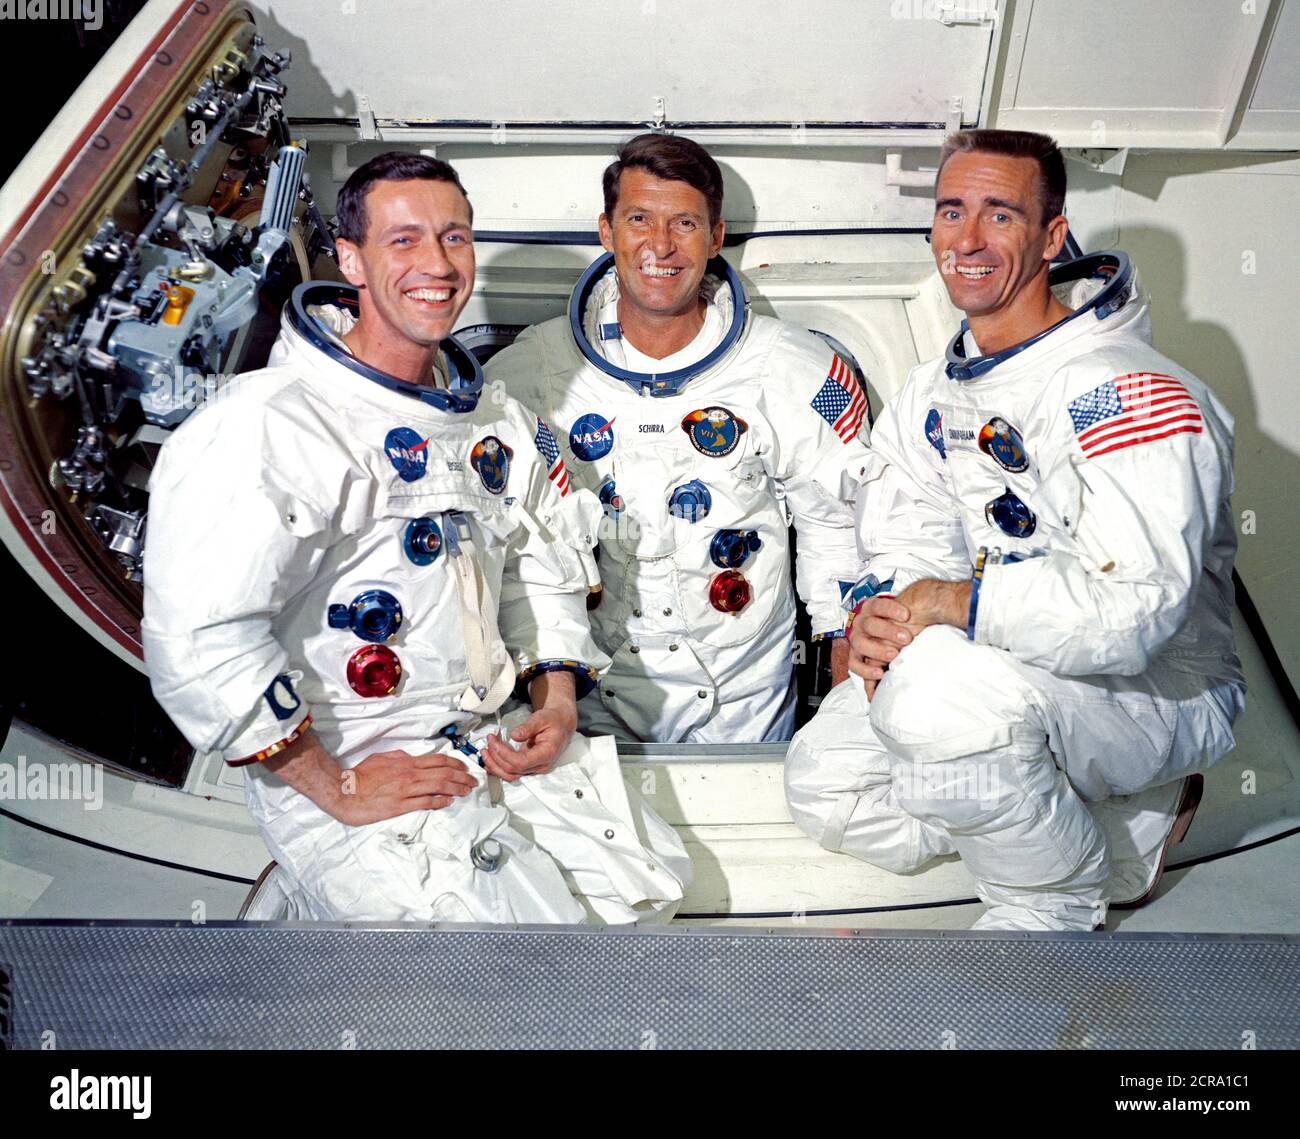 Prime crew of the first manned Apollo space mission, Apollo 7 (Spacecraft 101Saturn 205), L to R are Donn F. Eisele, Walter M. Schirra Jr. and Walter Cunningh Stock Photo